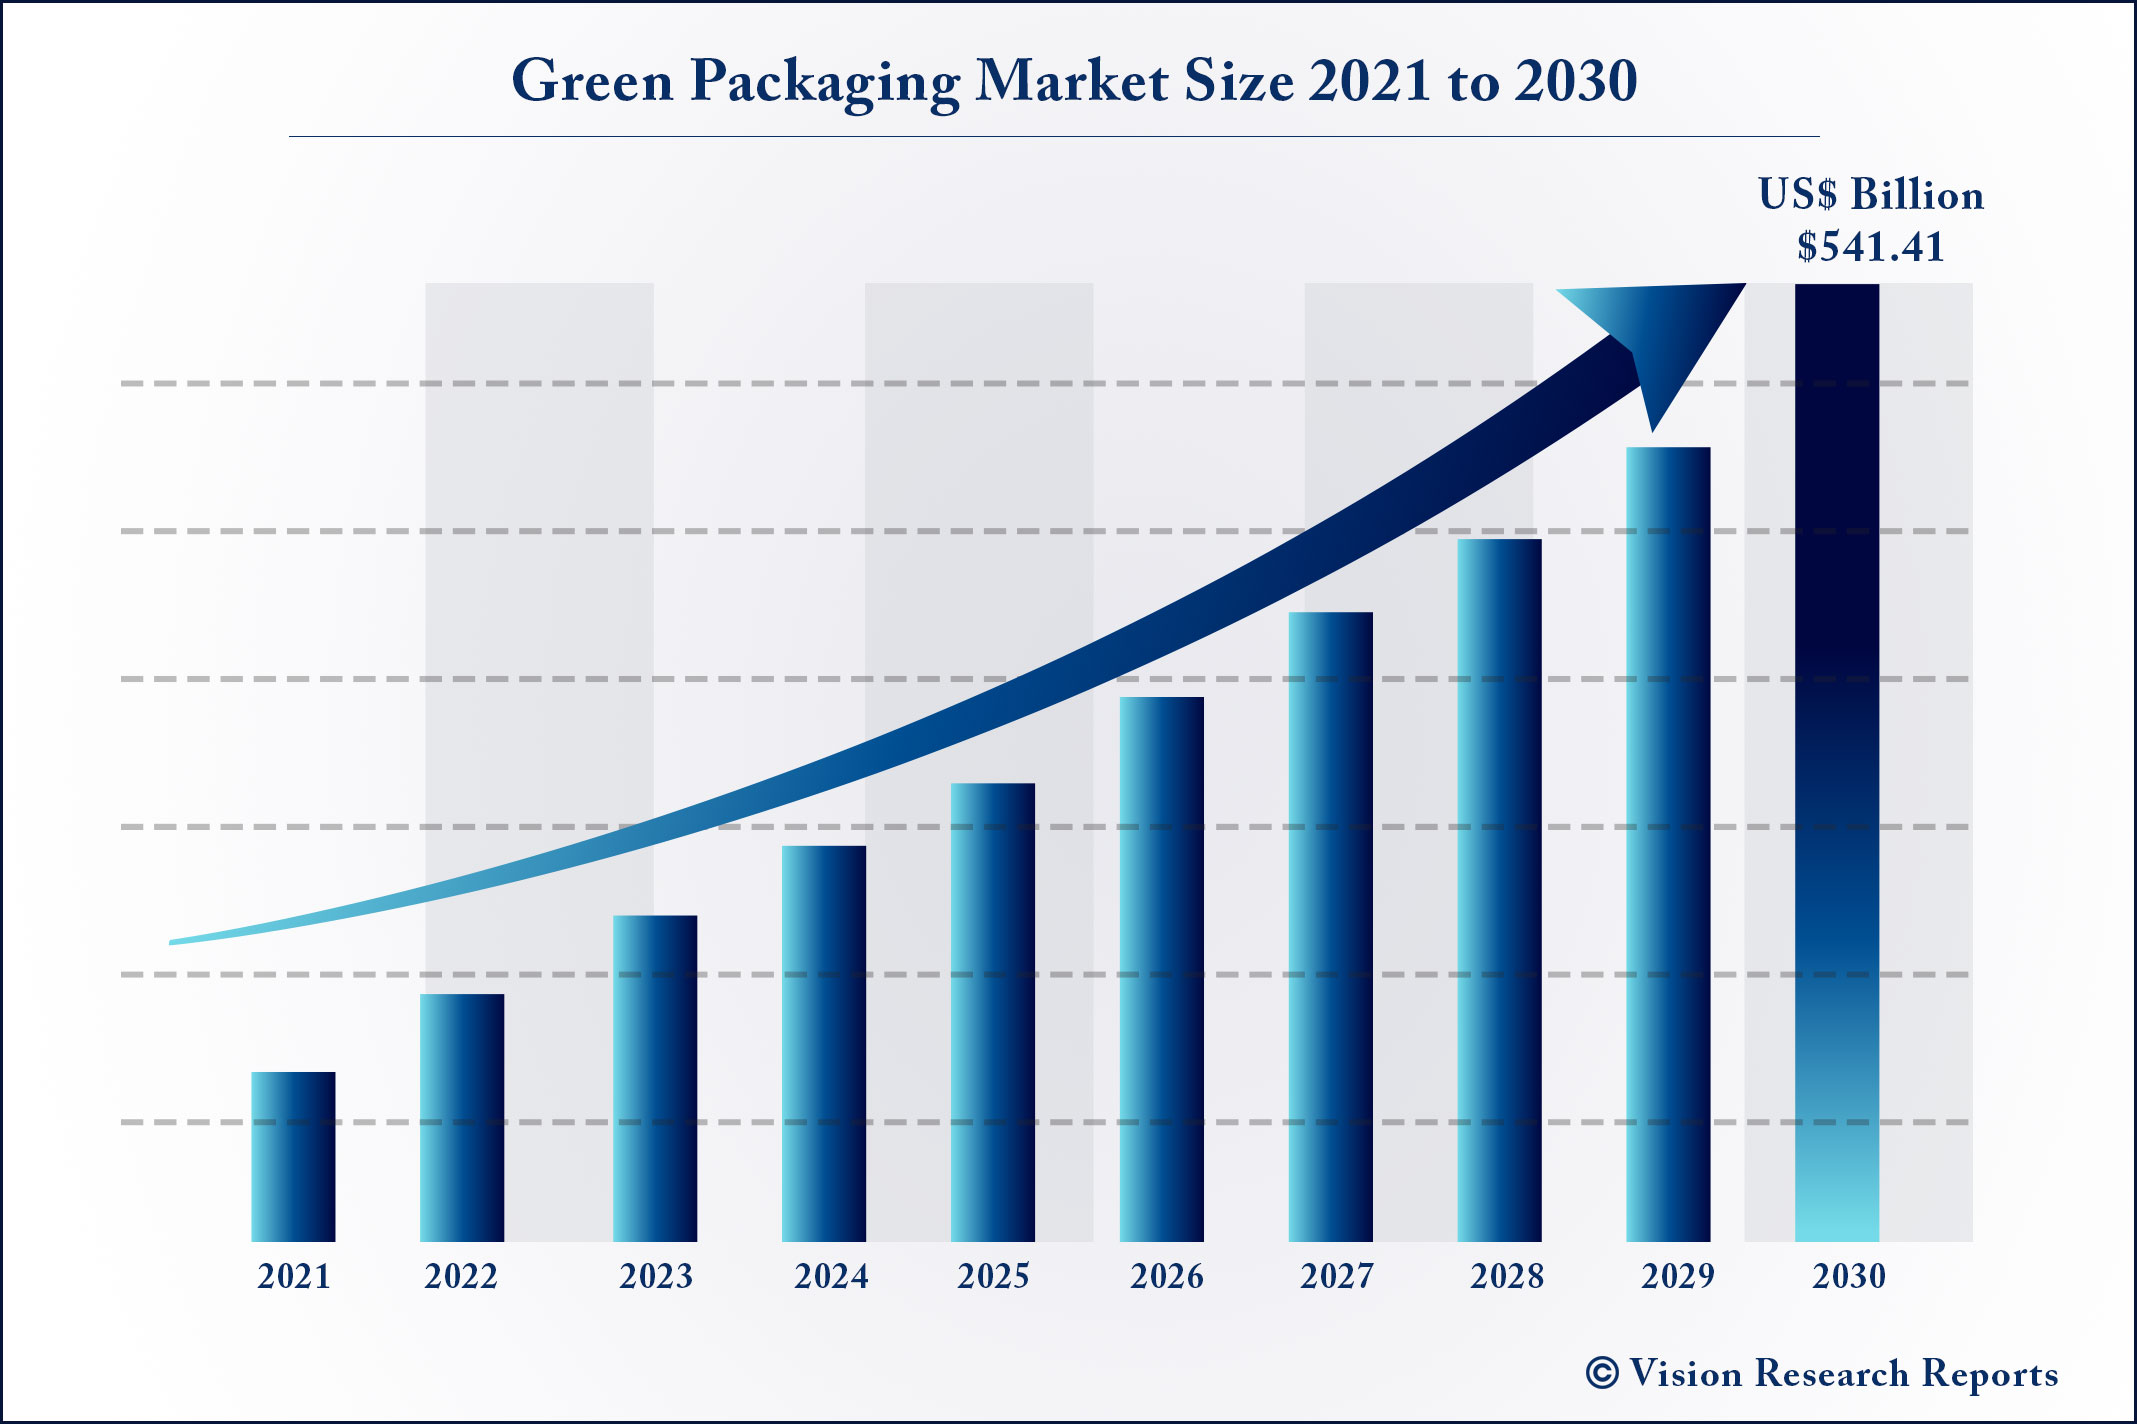 Green Packaging Market Size 2021 to 2030